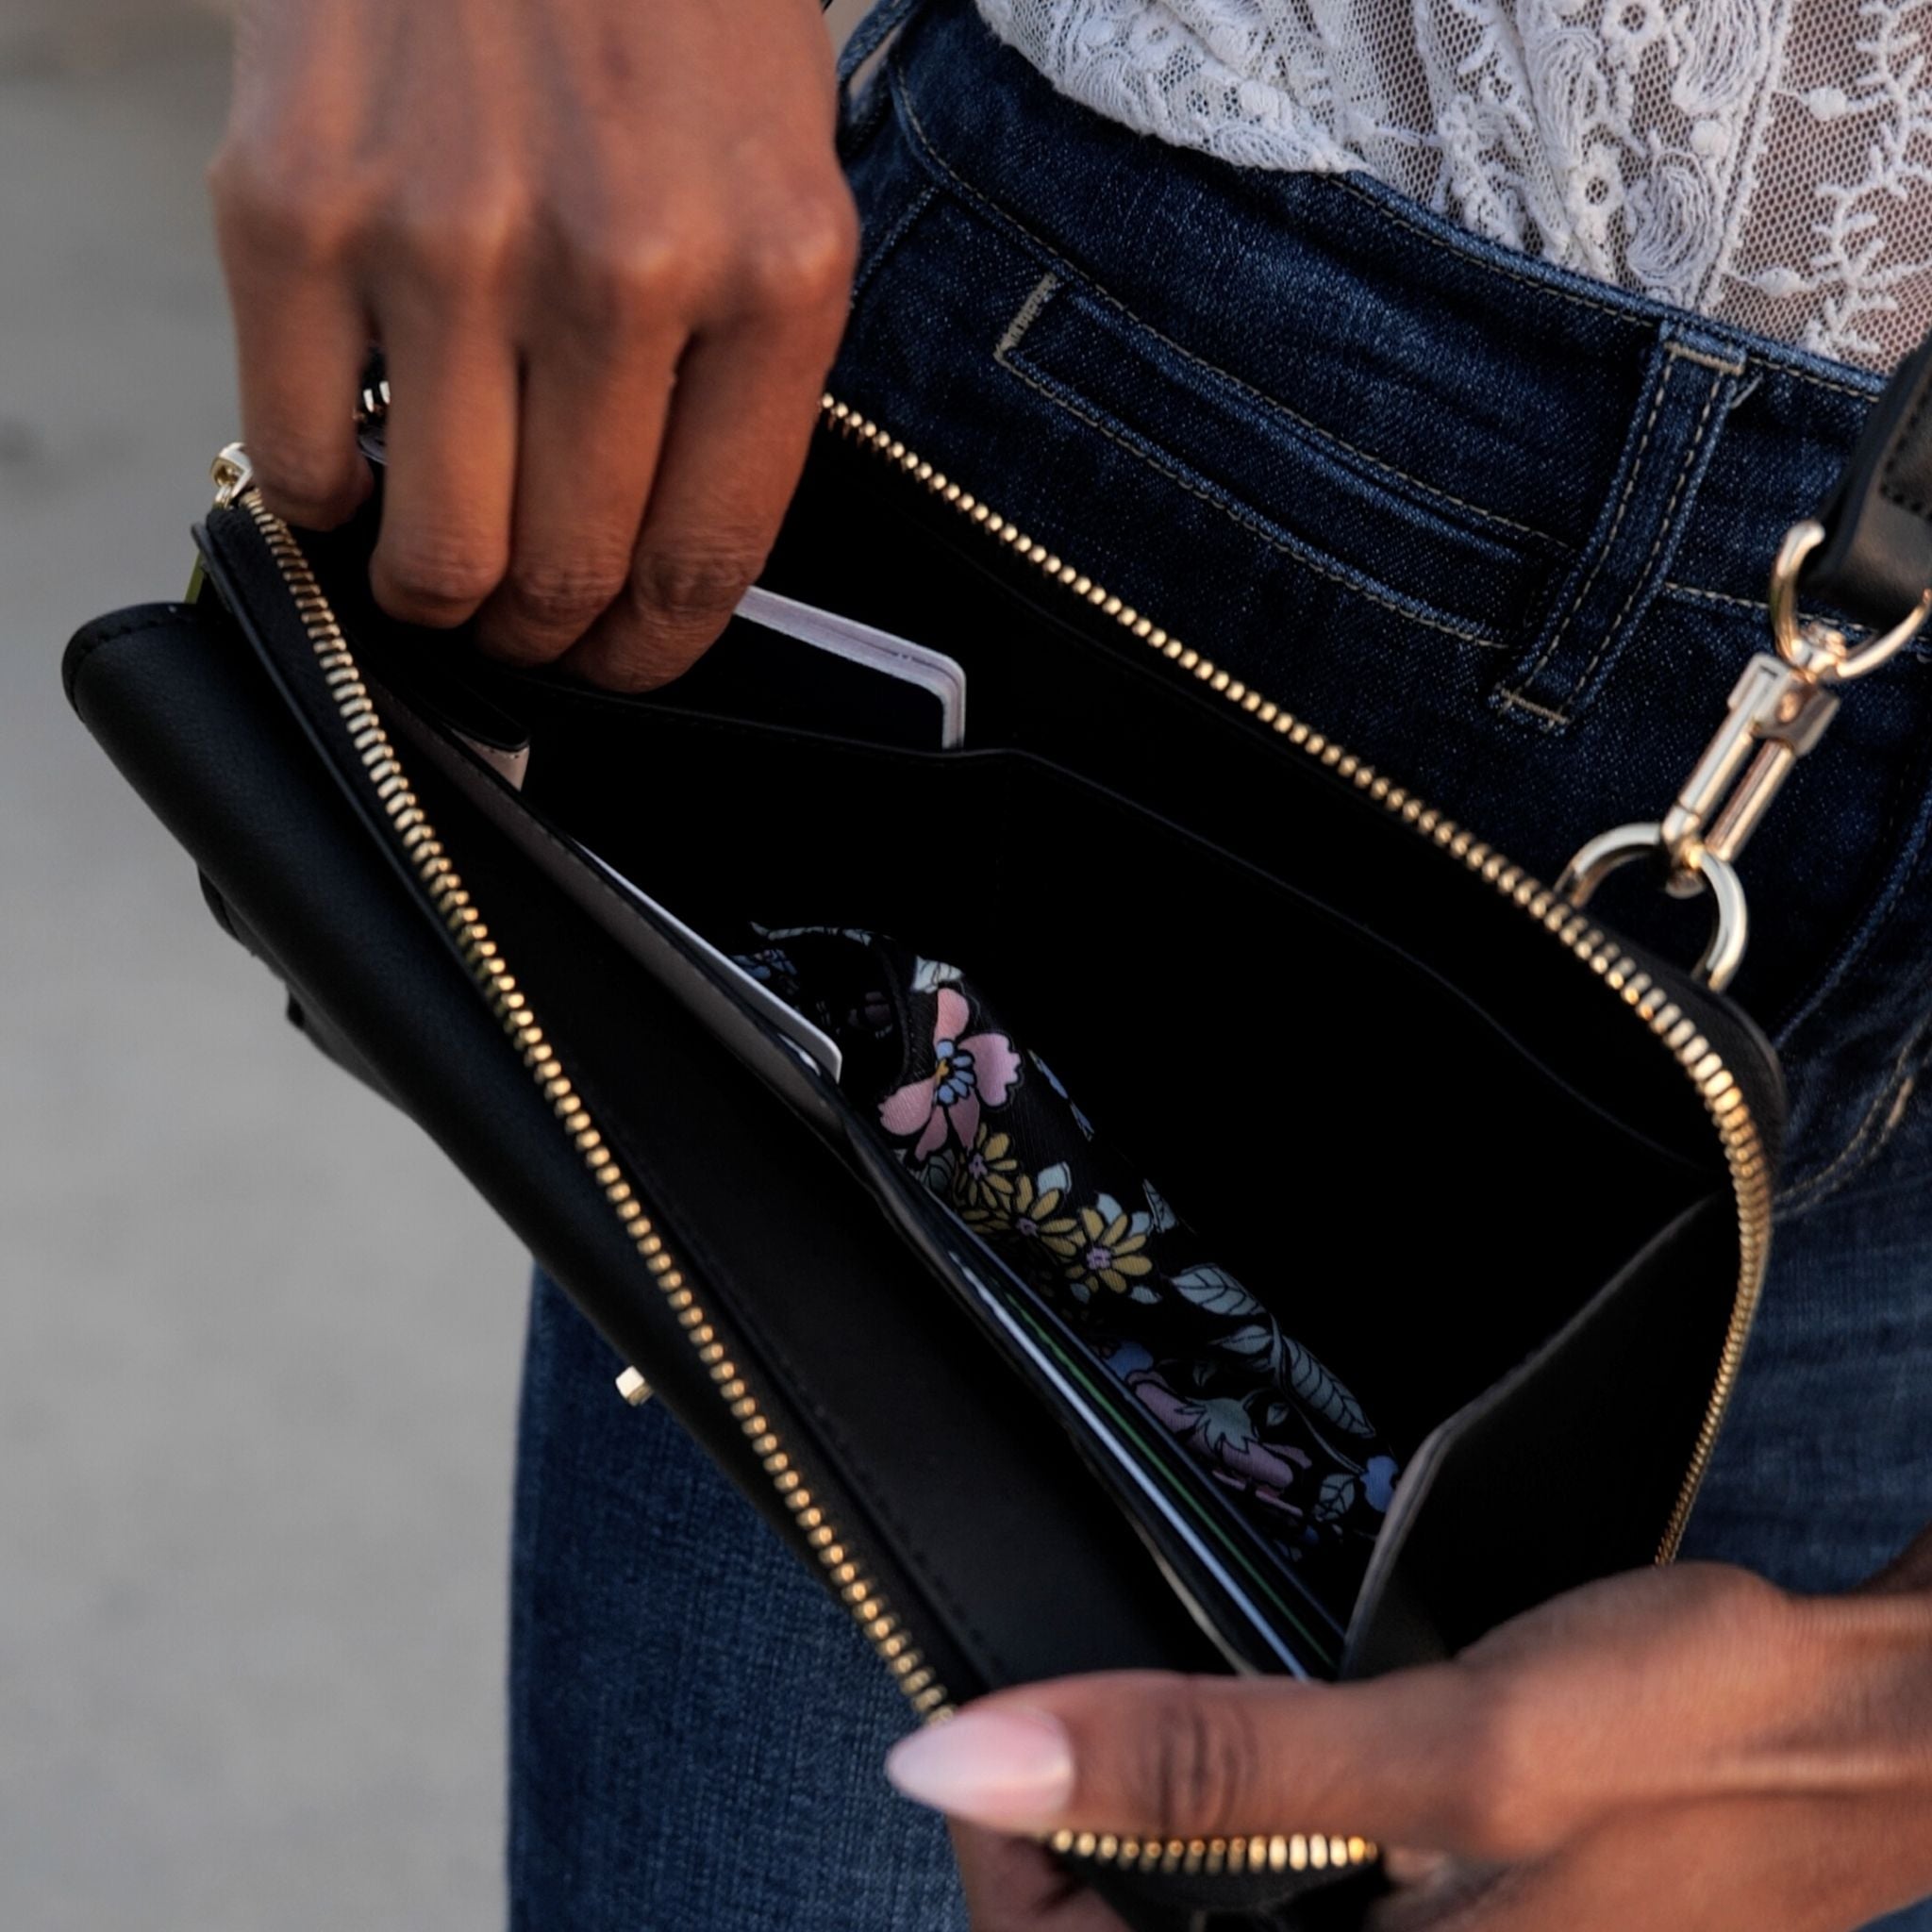 Our Top 10 Most Stylish Concealed-Carry Purses | NRA Family